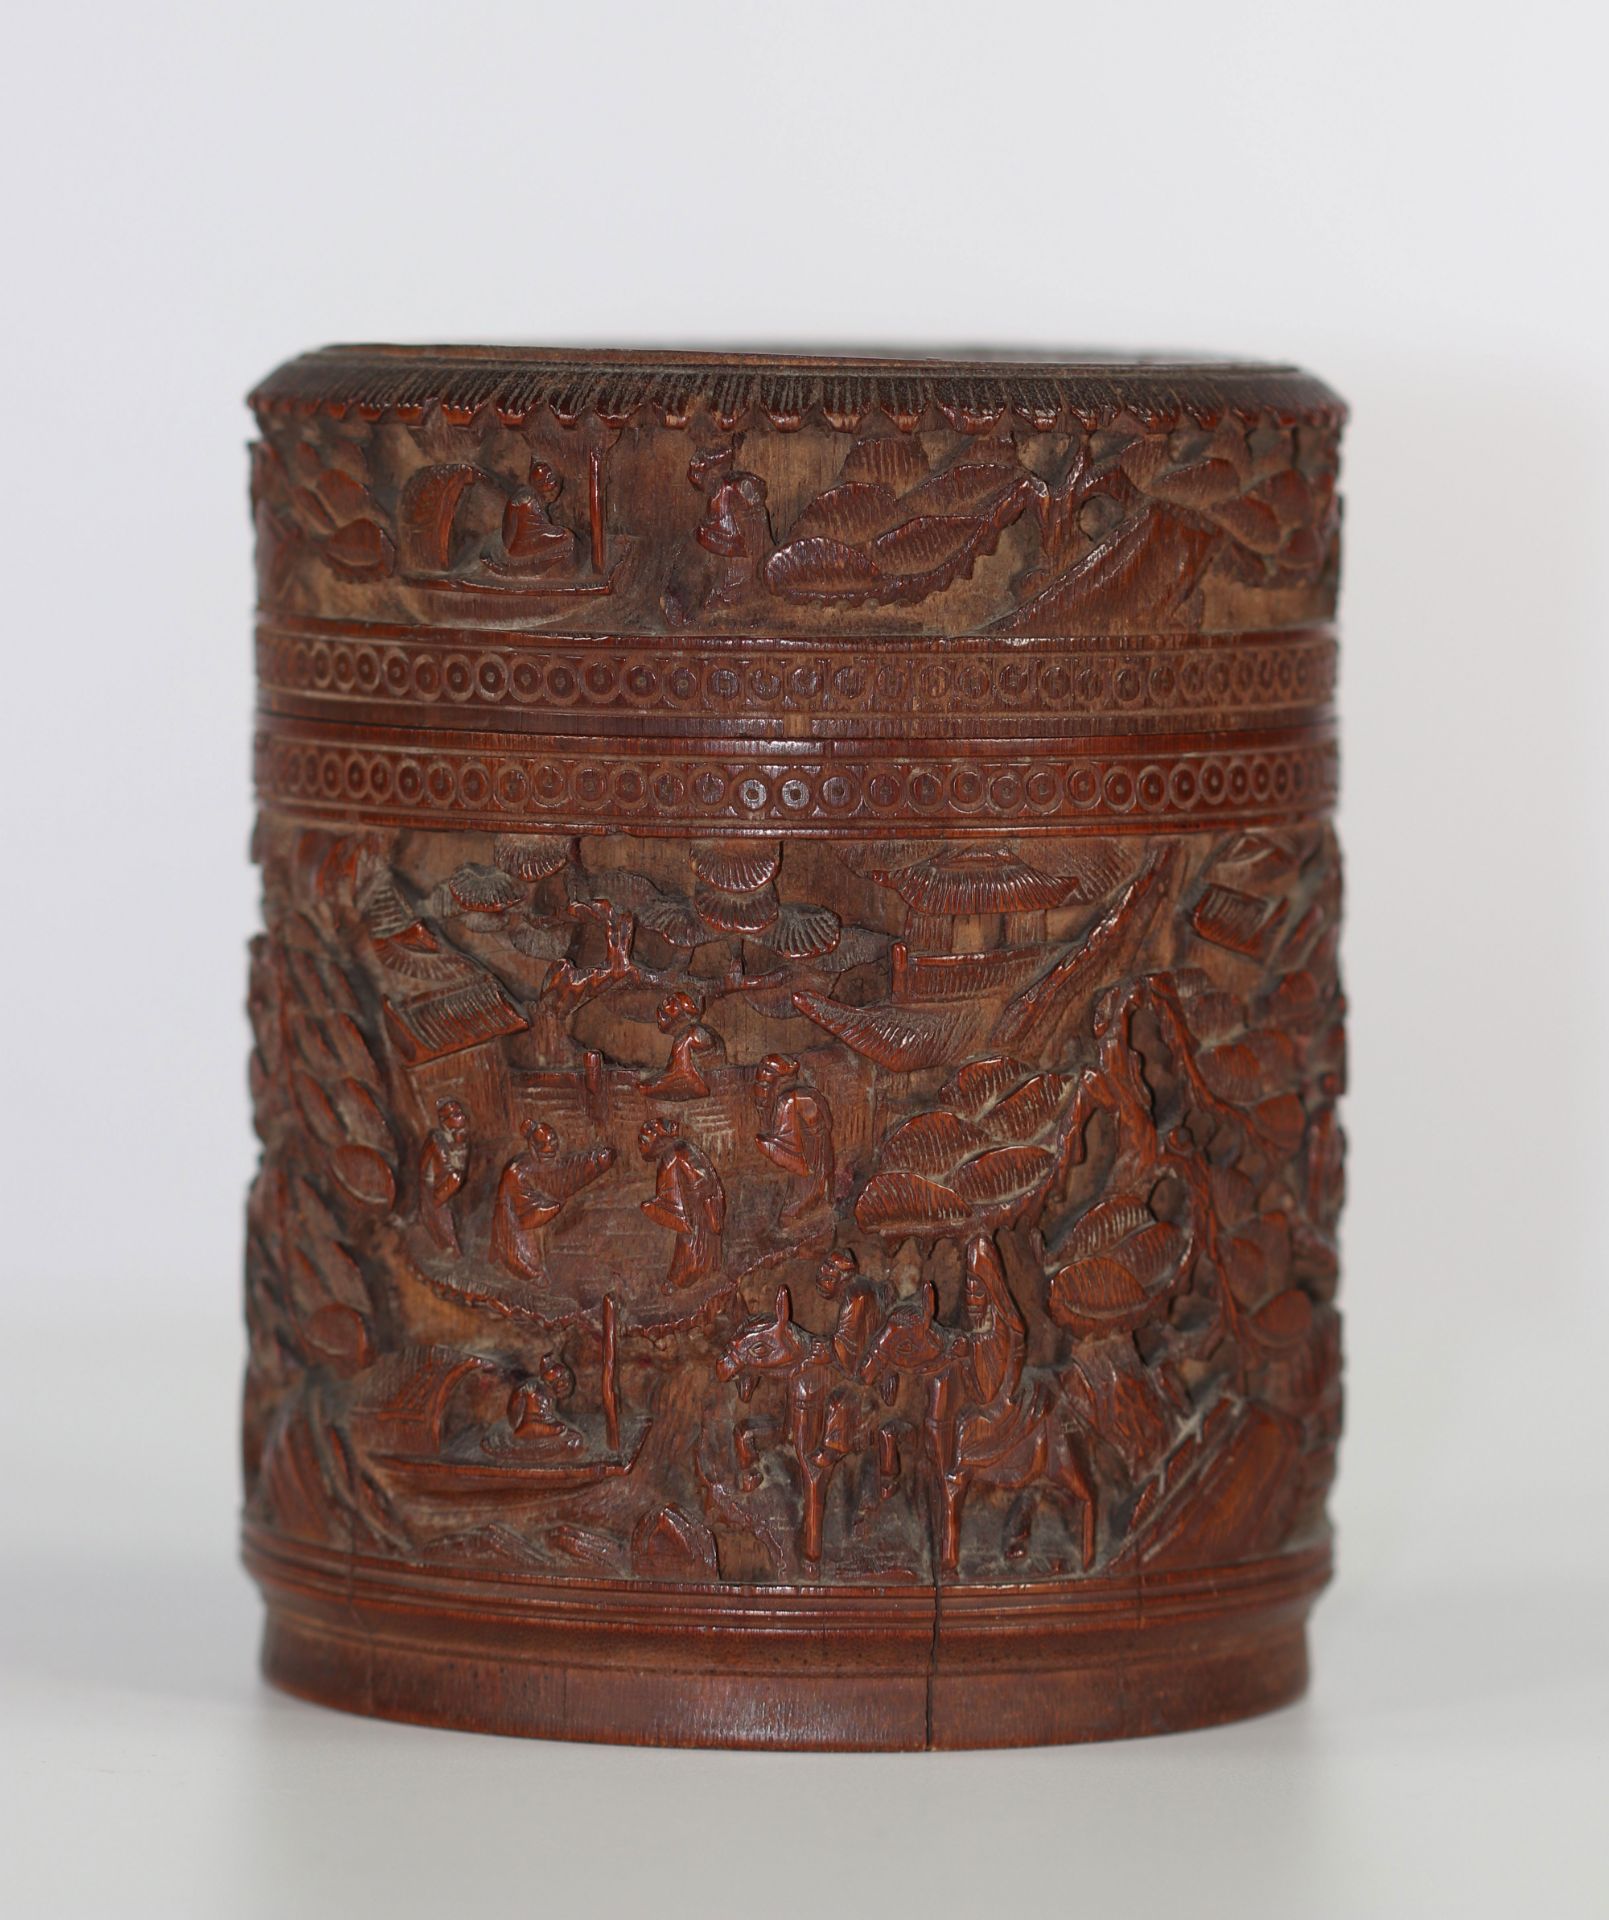 bamboo box the lid with jade inlay.China late nineteenth. - Image 2 of 6